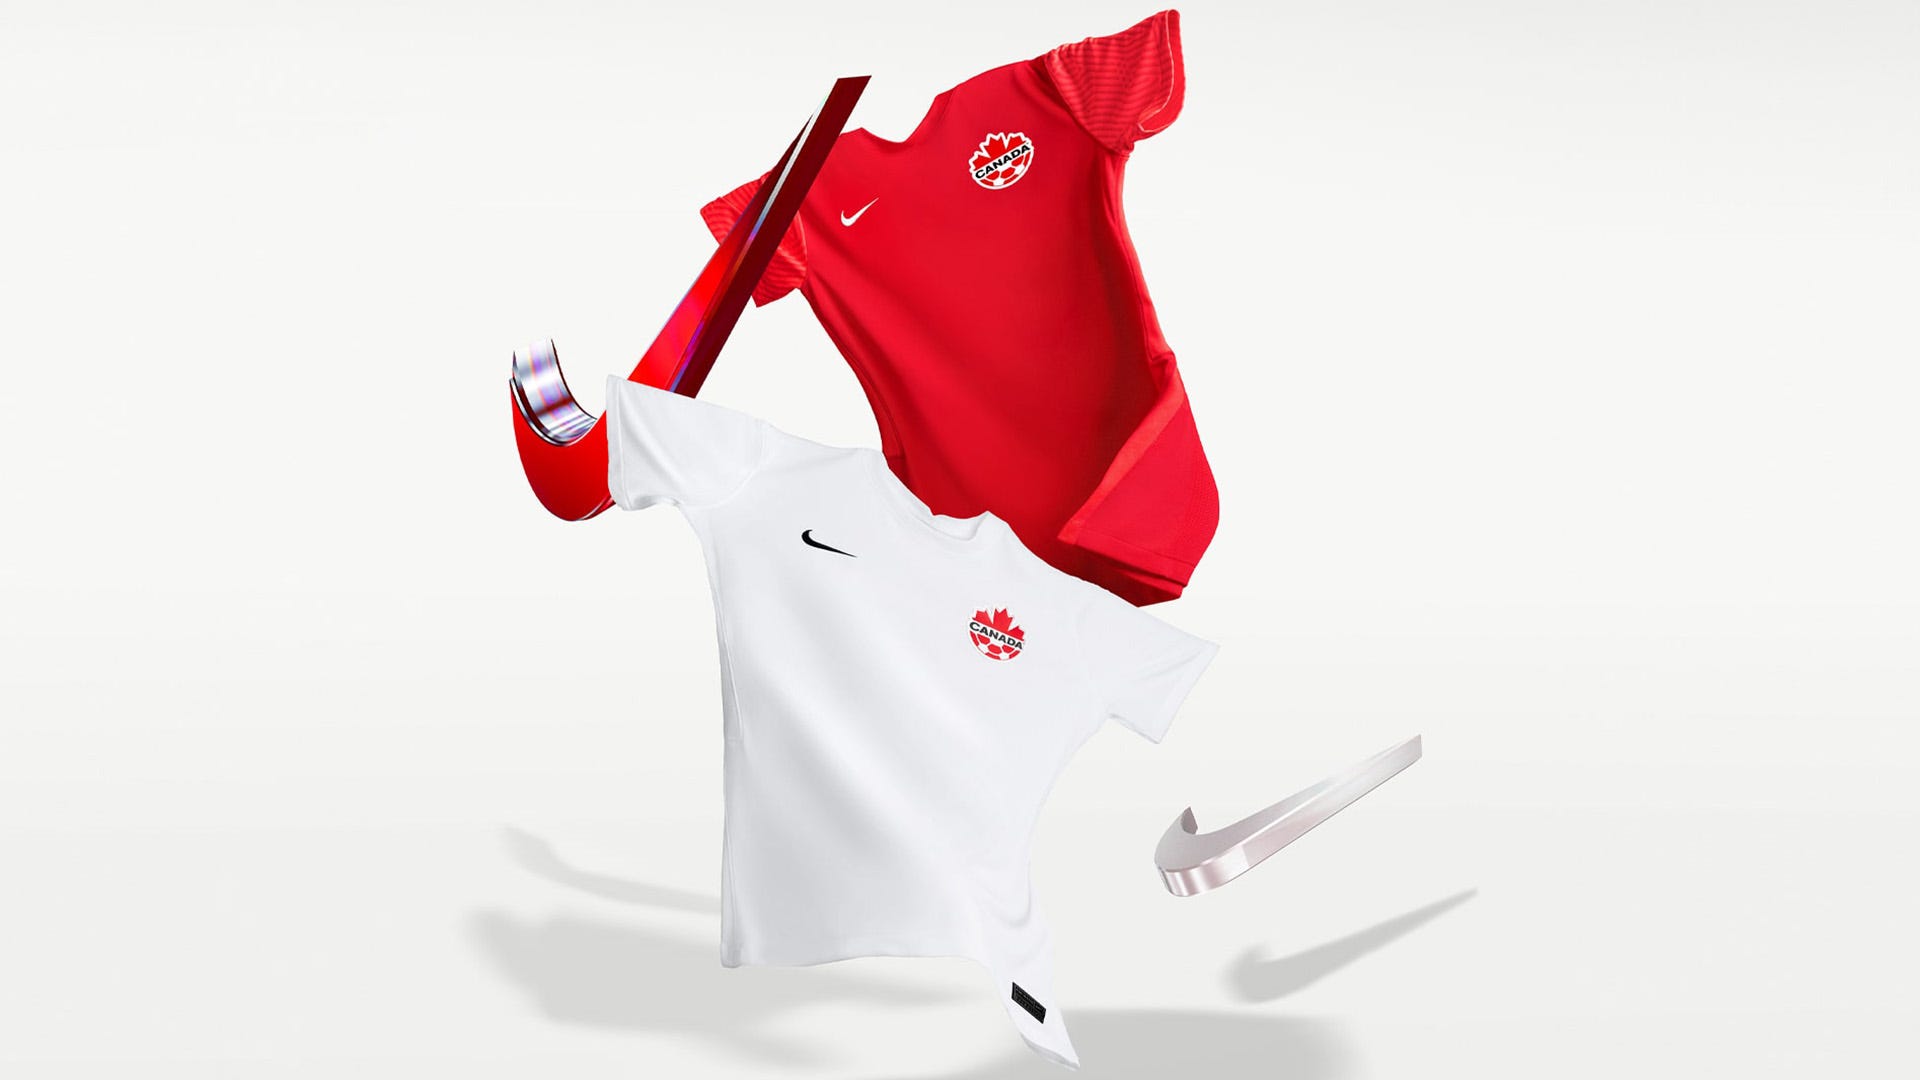 Canada World Cup 2022 kit